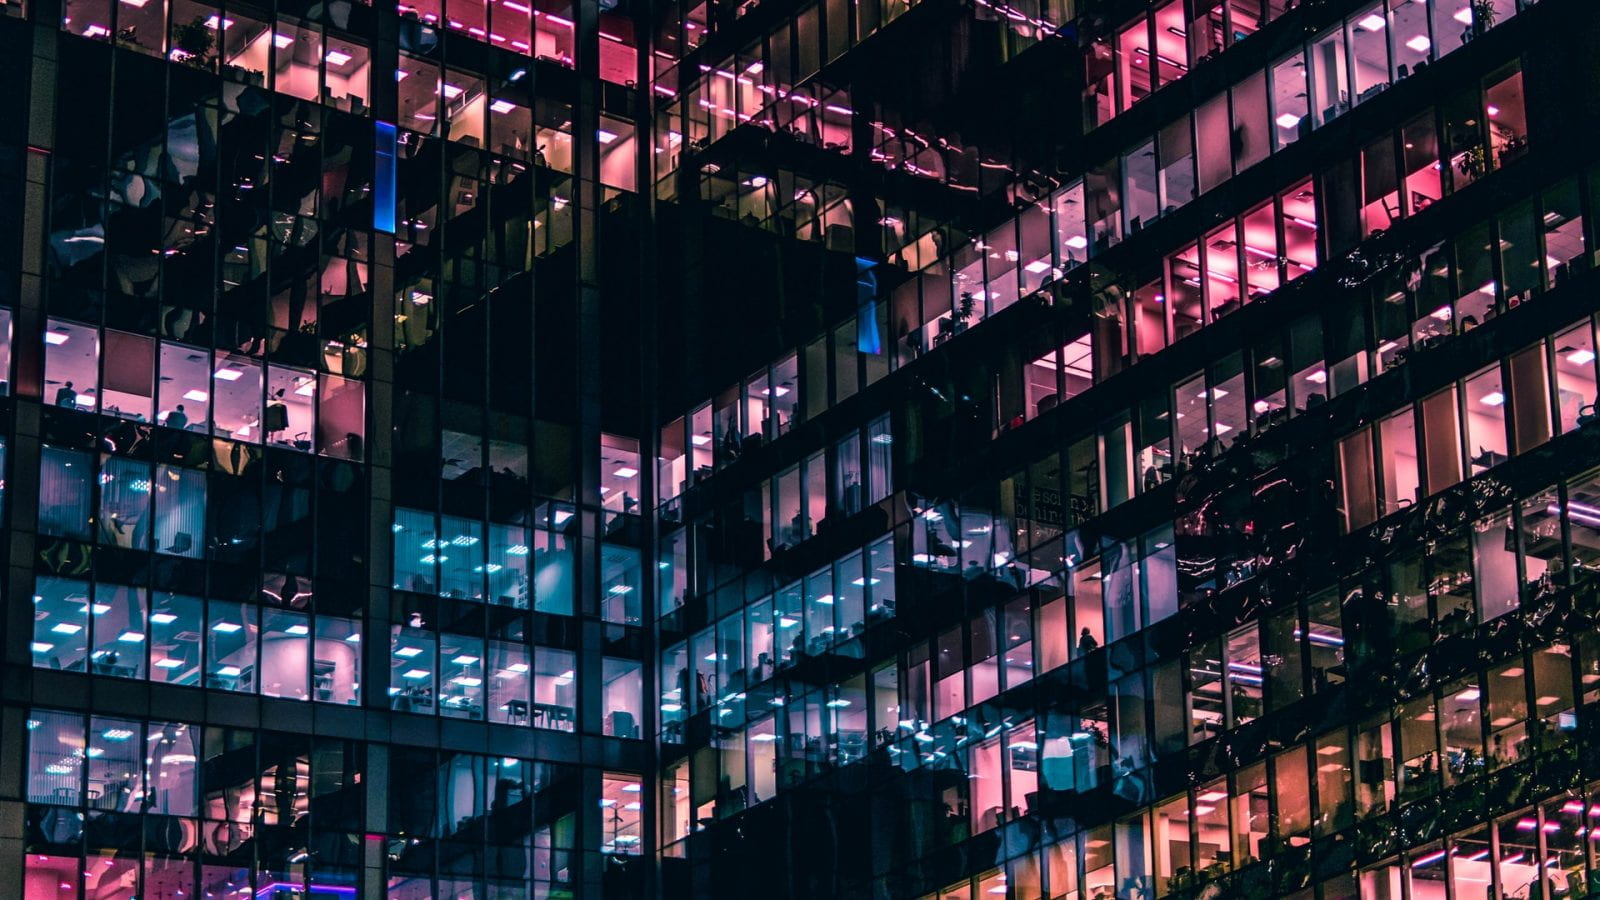 Abstract art showing pink and blue windows of a building at night from a street view. Feature Photo.